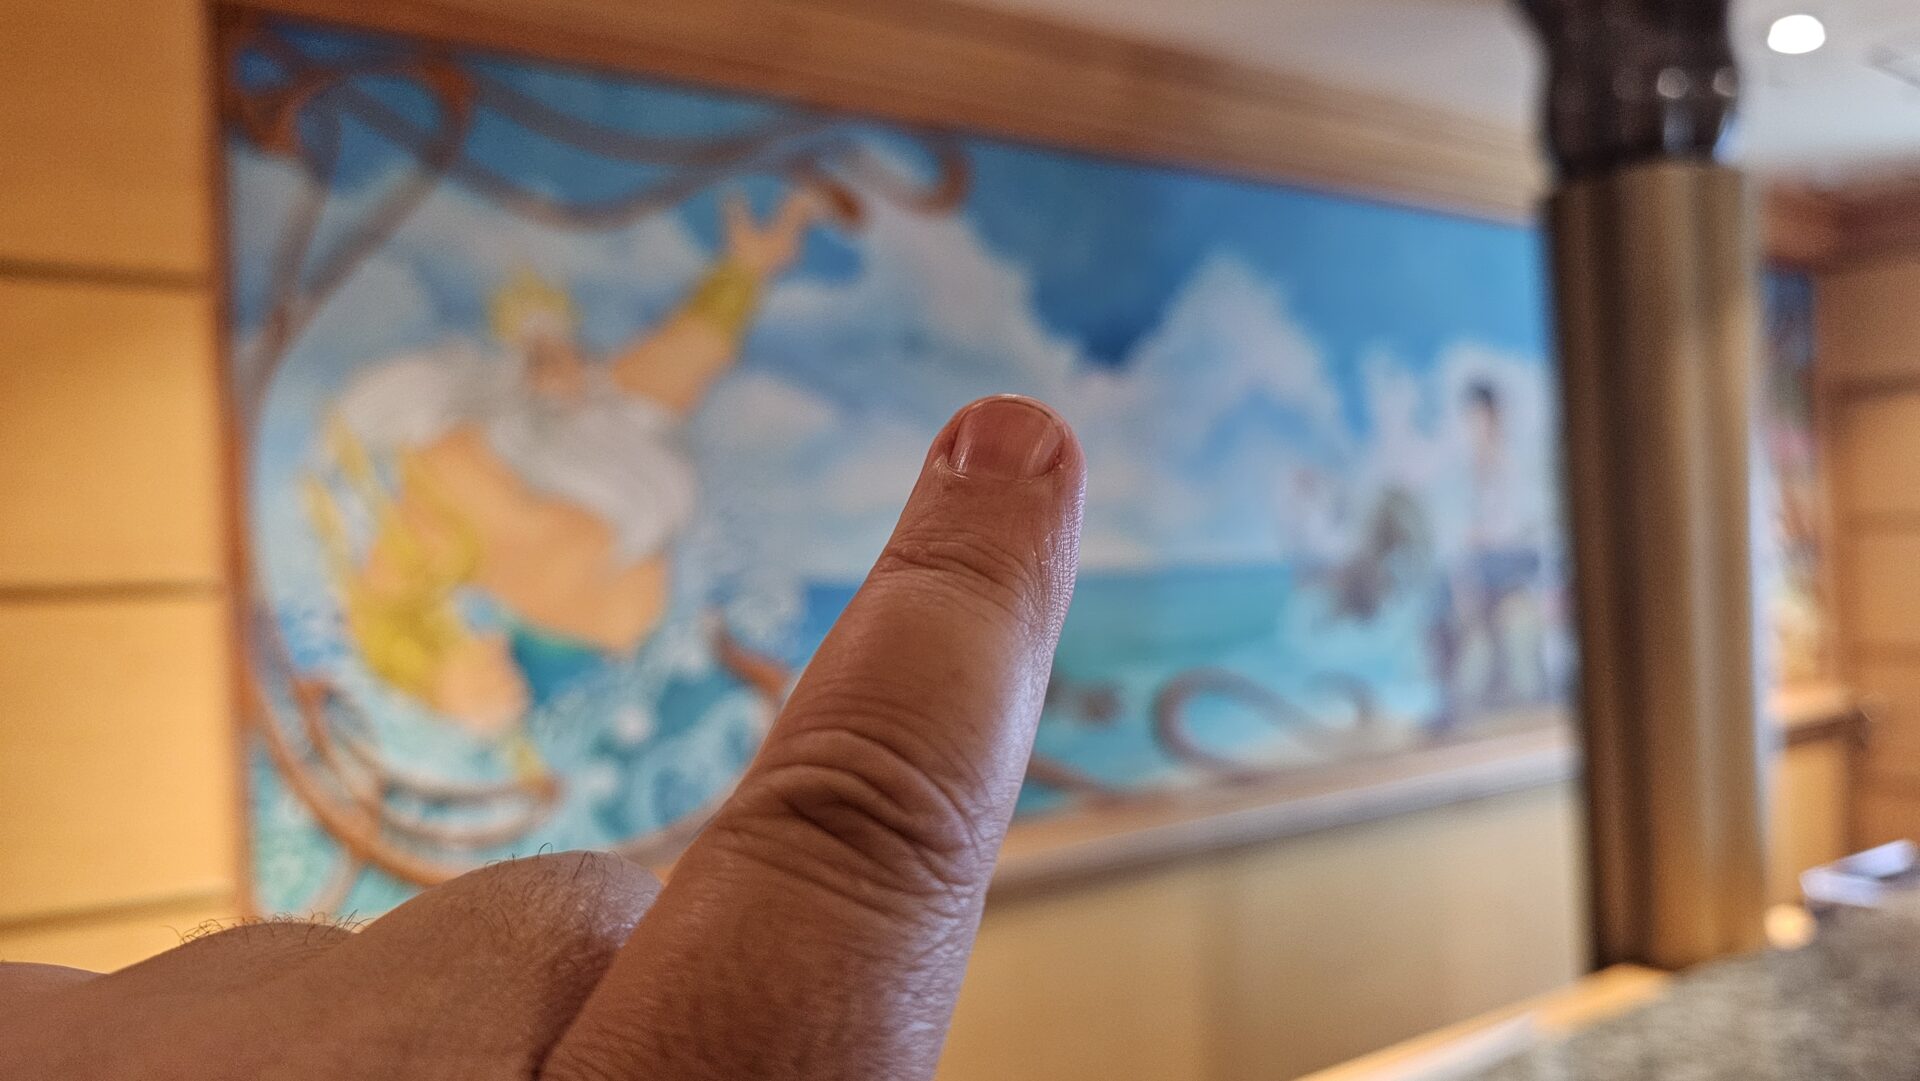 The Little Mermaid Mural from Port Adventures